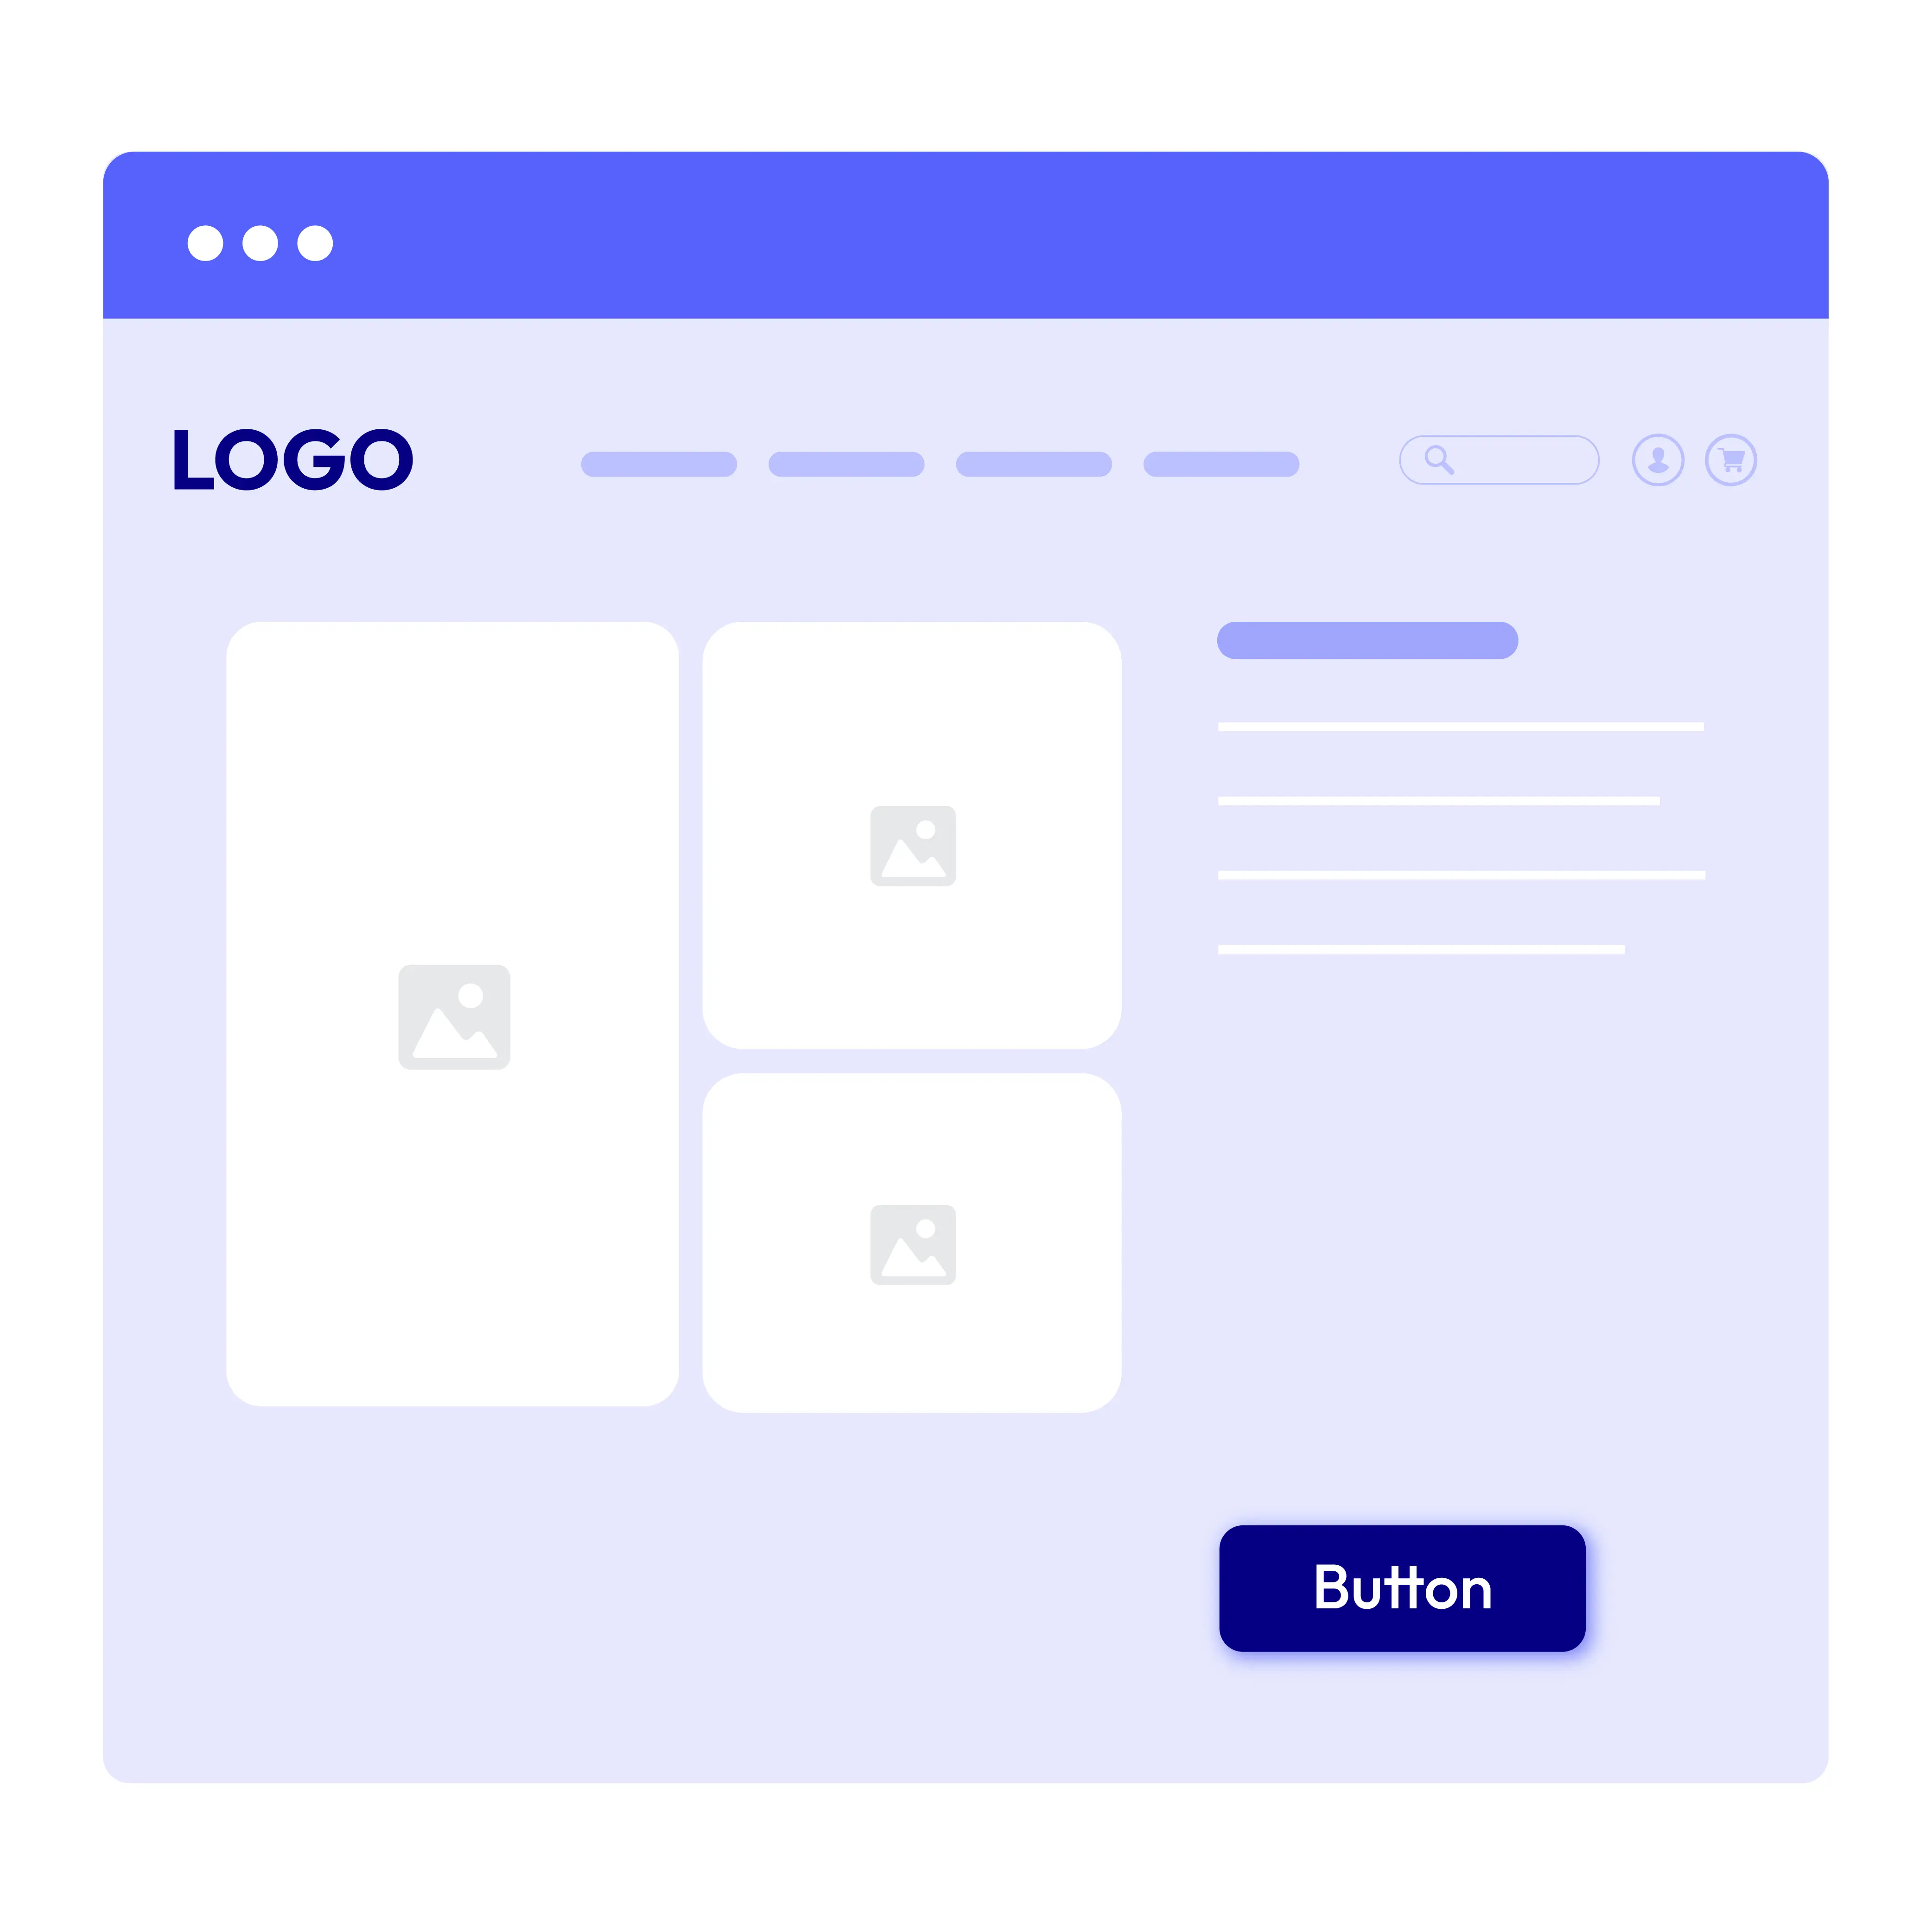 Add logos/buttons/images